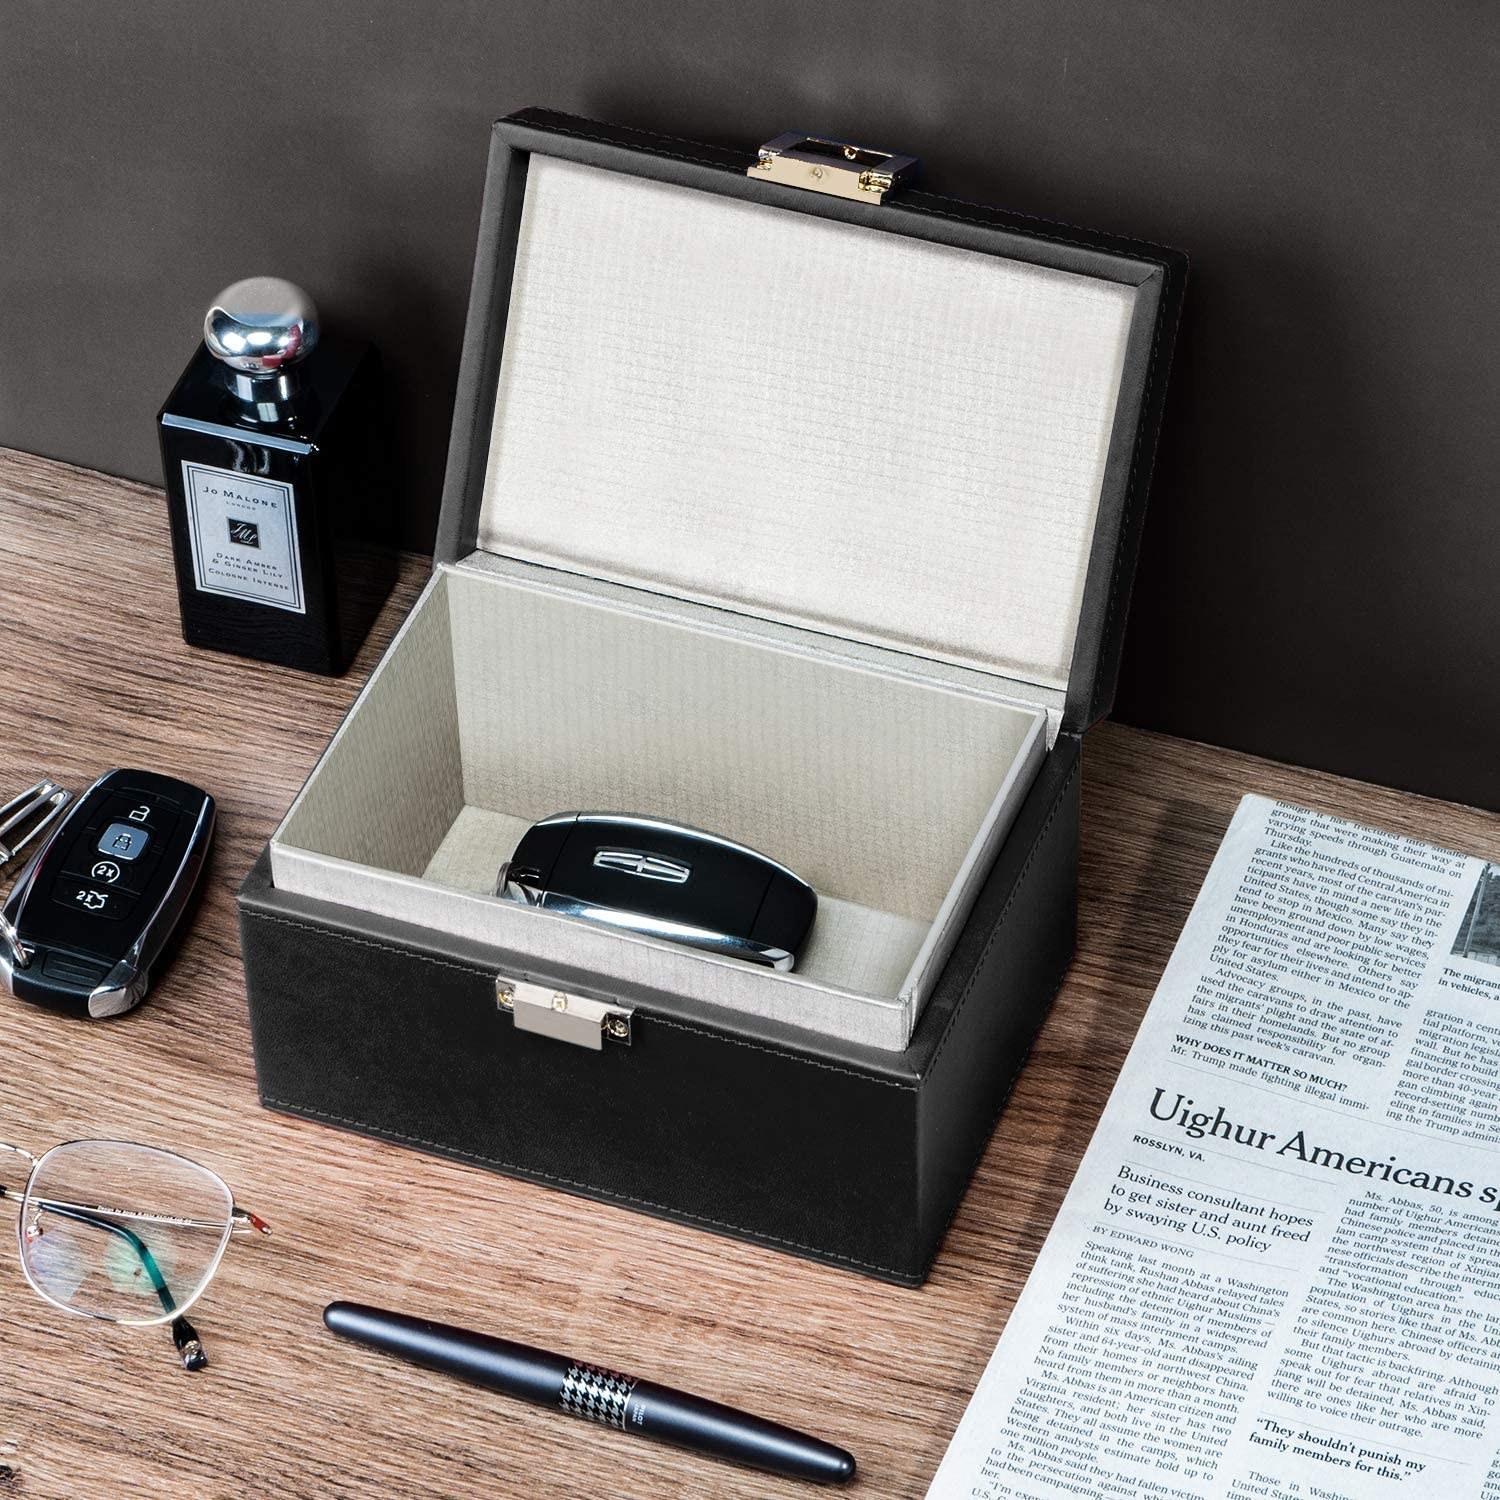 The box open on a table with a key fob inside of it, and various items like glasses and a newspaper surrounding it